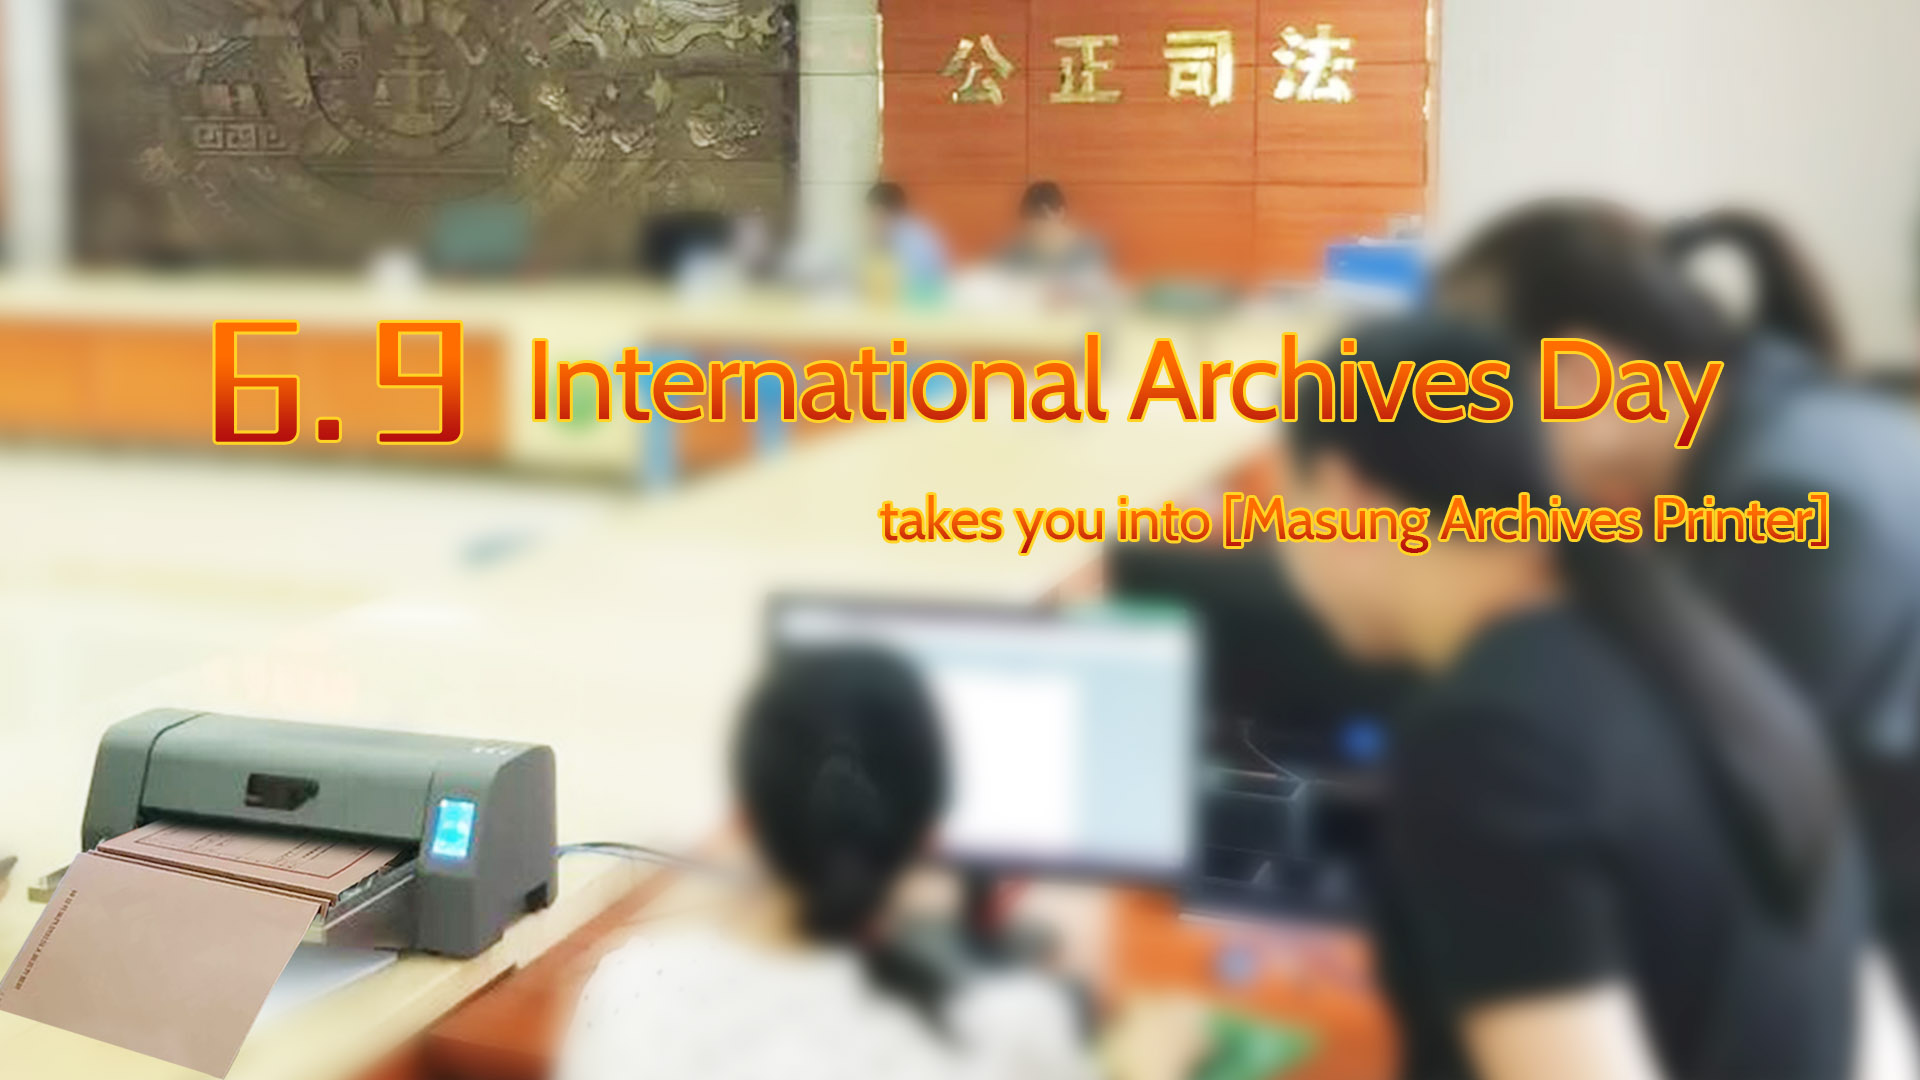 "6.9 International Archives Day" takes you into [masung Archives Printer]